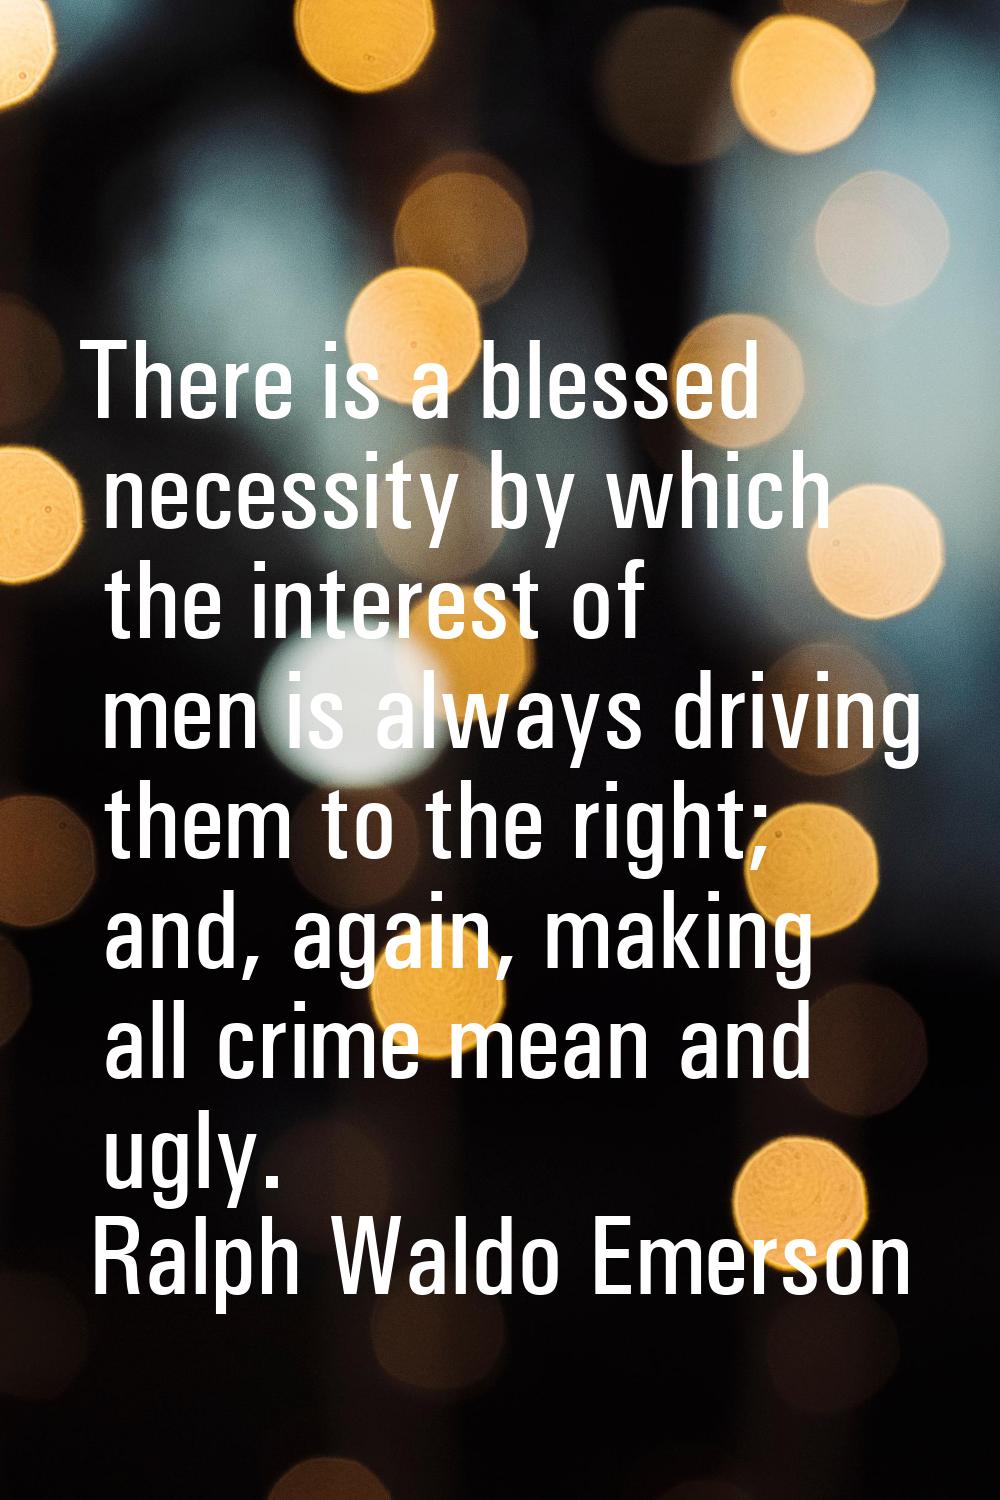 There is a blessed necessity by which the interest of men is always driving them to the right; and,